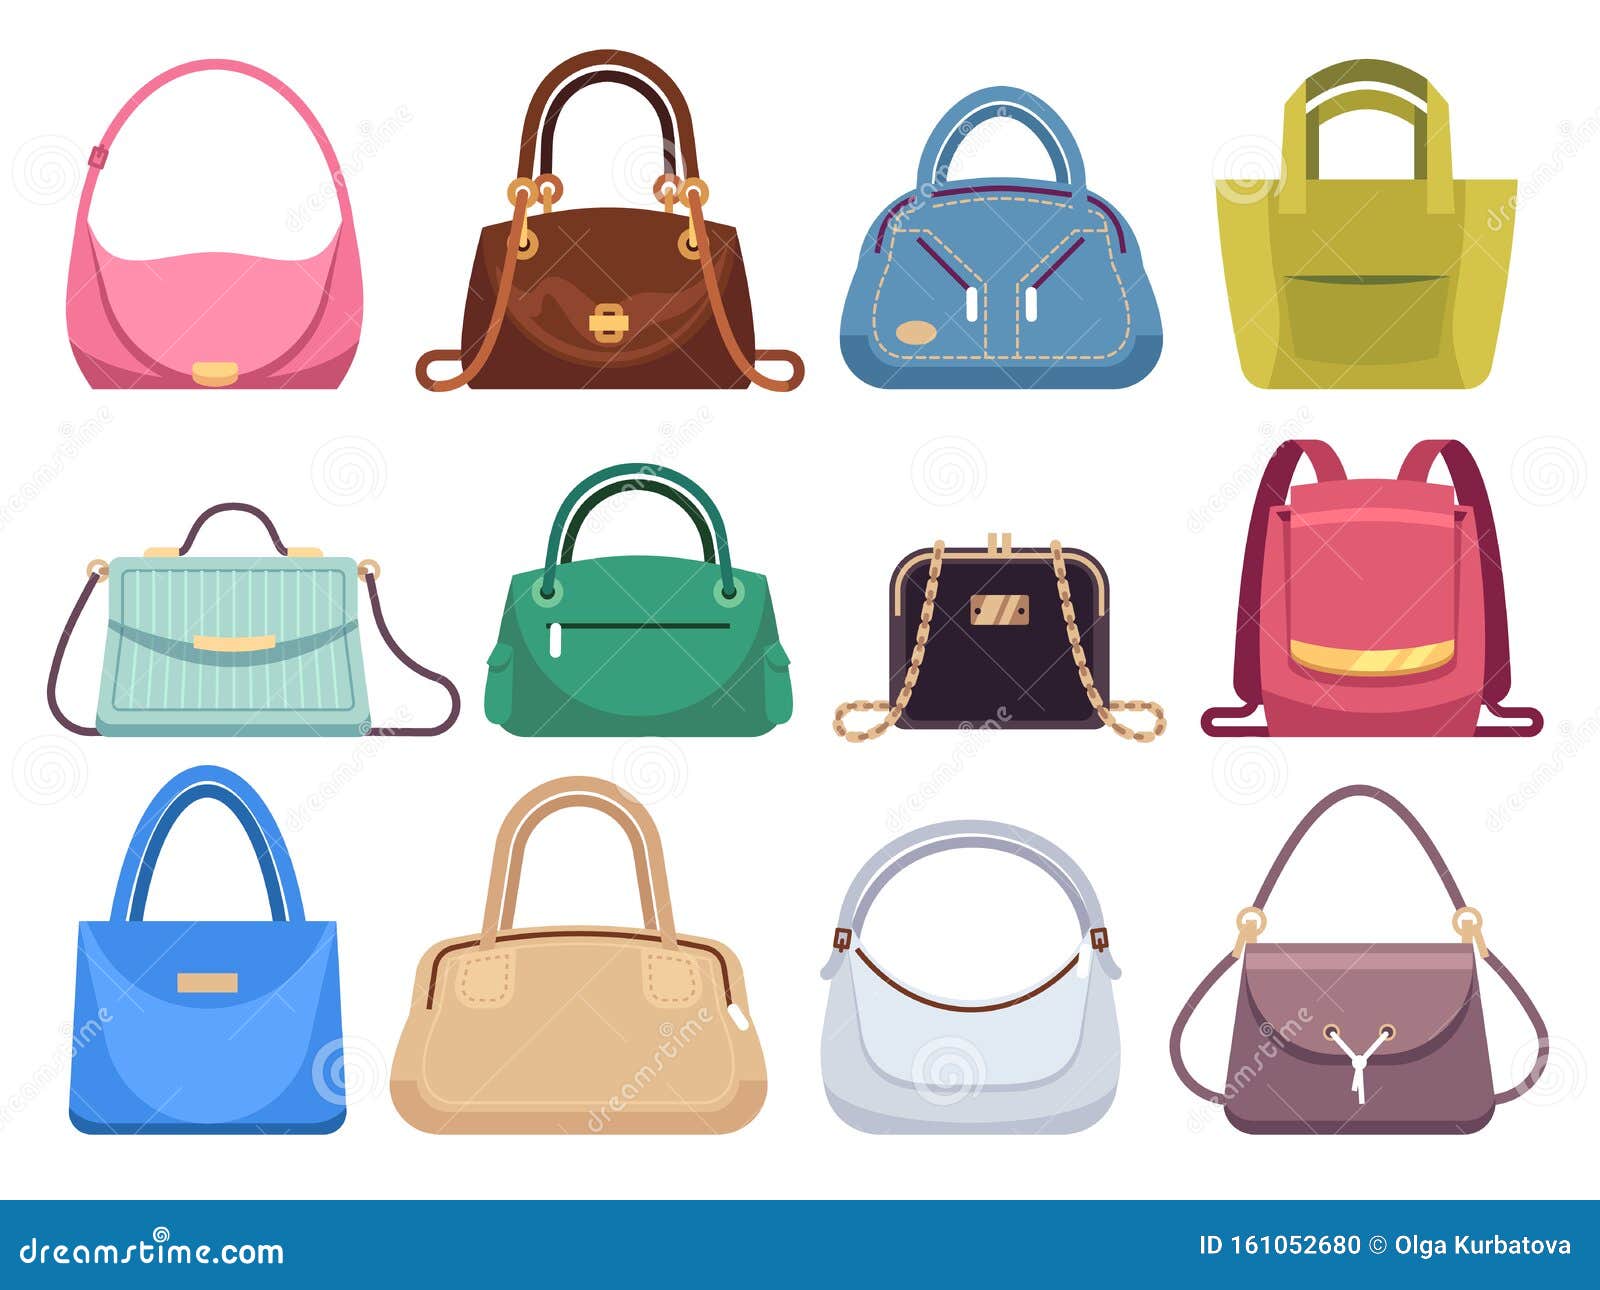 JenTheRealfluencer's Bags Collection on LTK